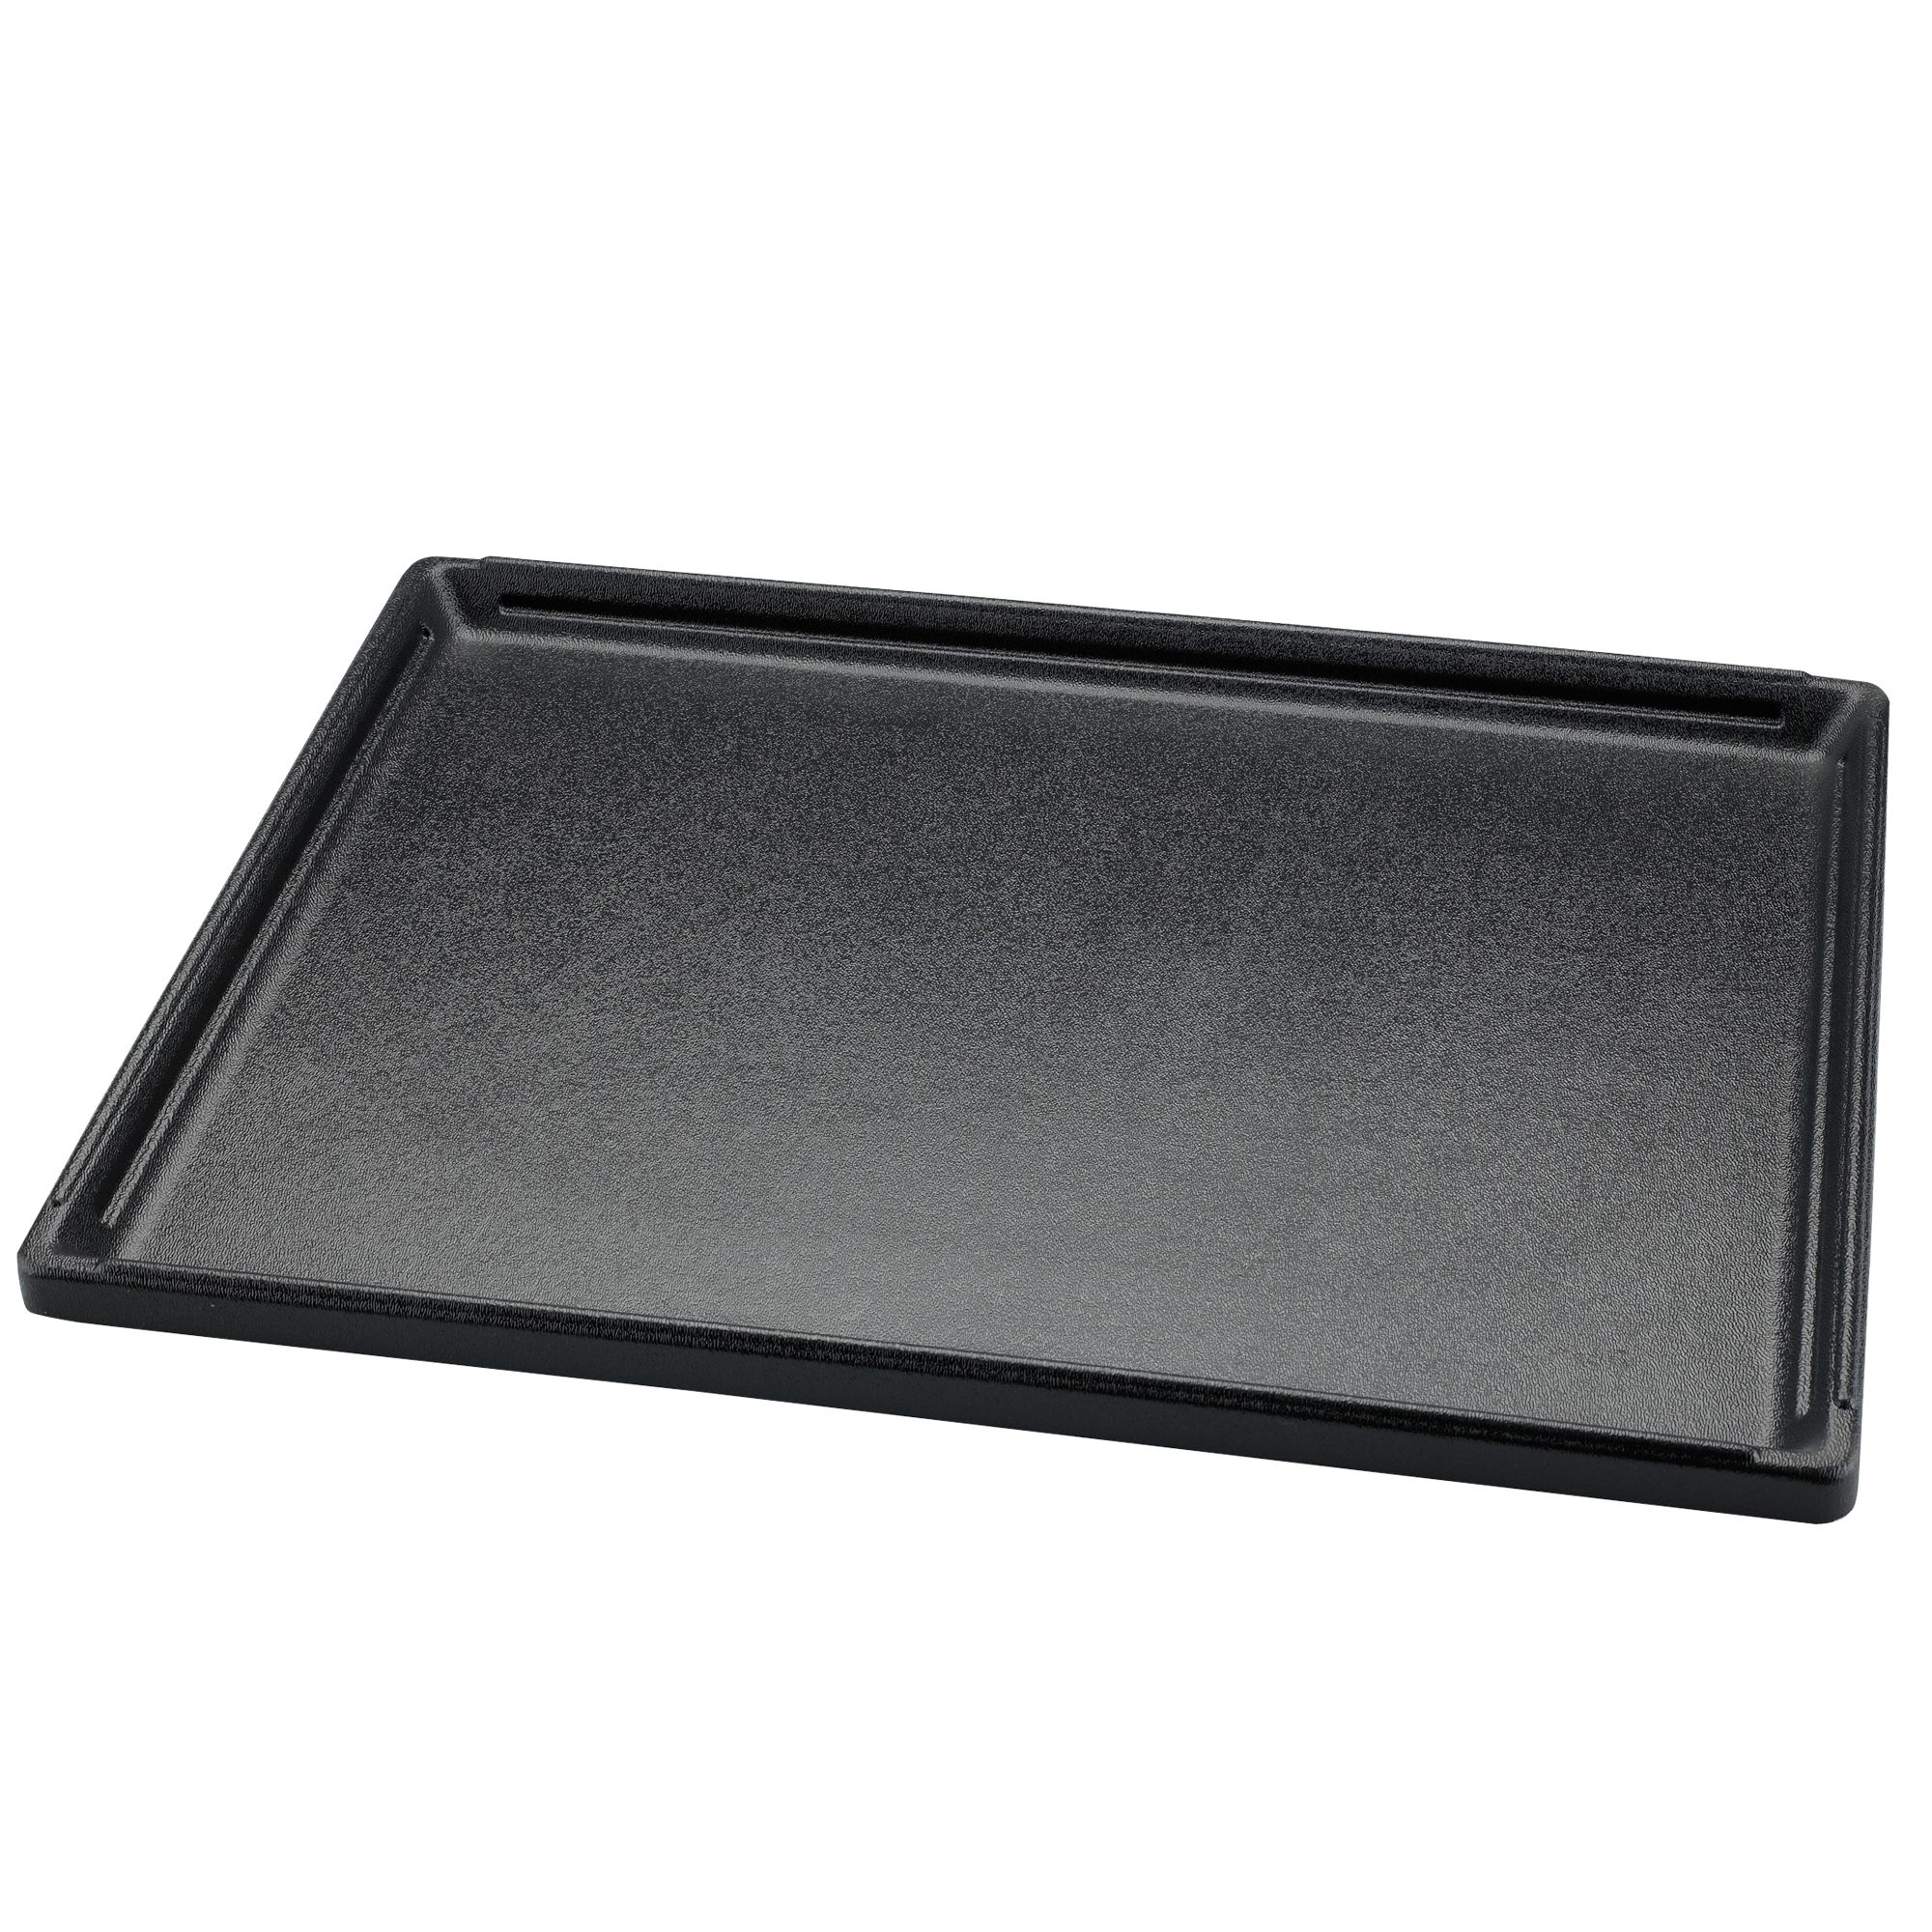 replacement tray for xxl dog crate